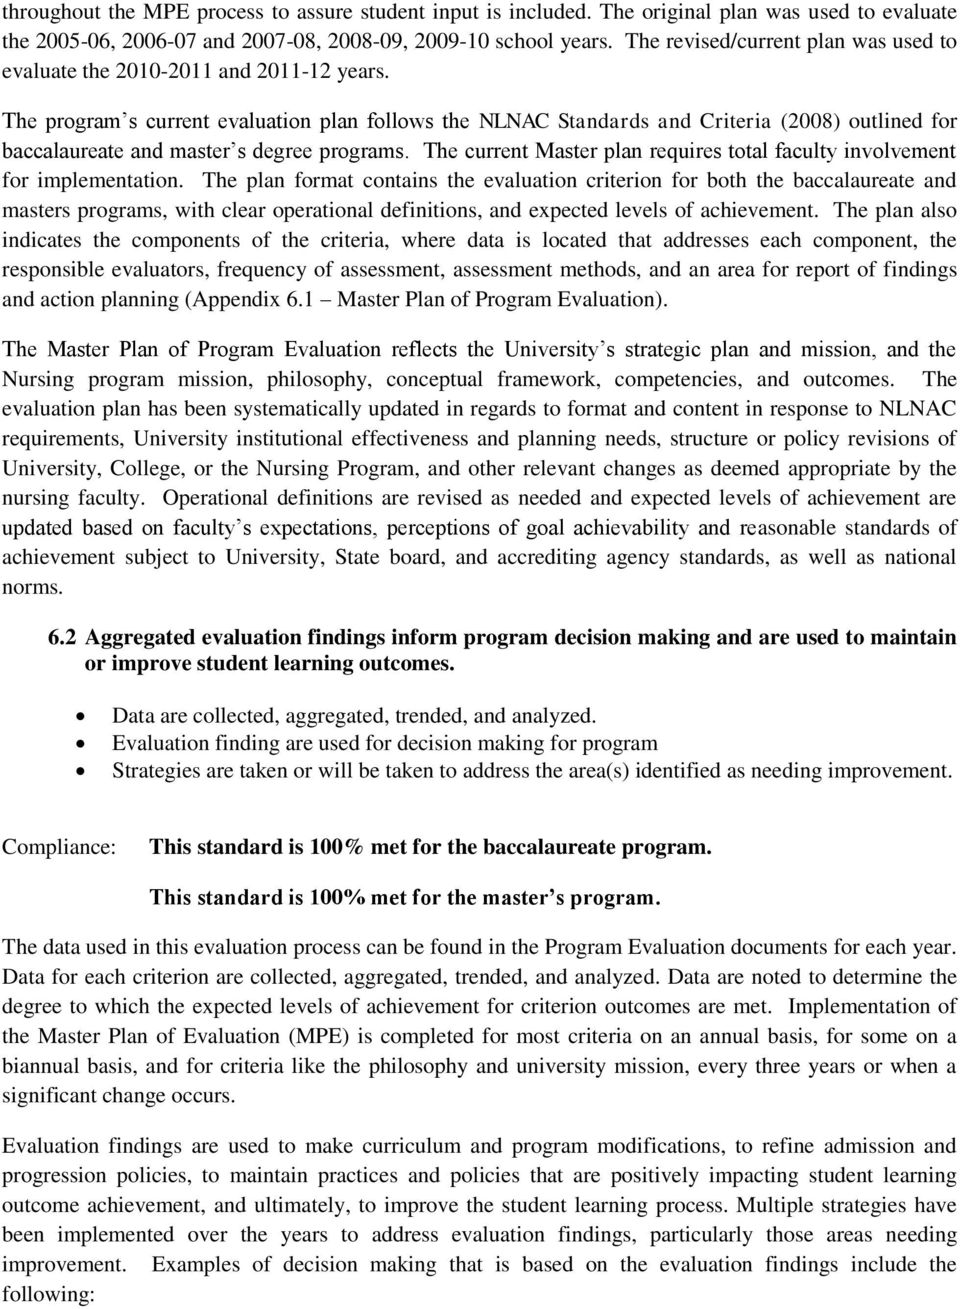 The program s current evaluation plan follows the NLNAC Standards and Criteria (2008) outlined for baccalaureate and master s degree programs.